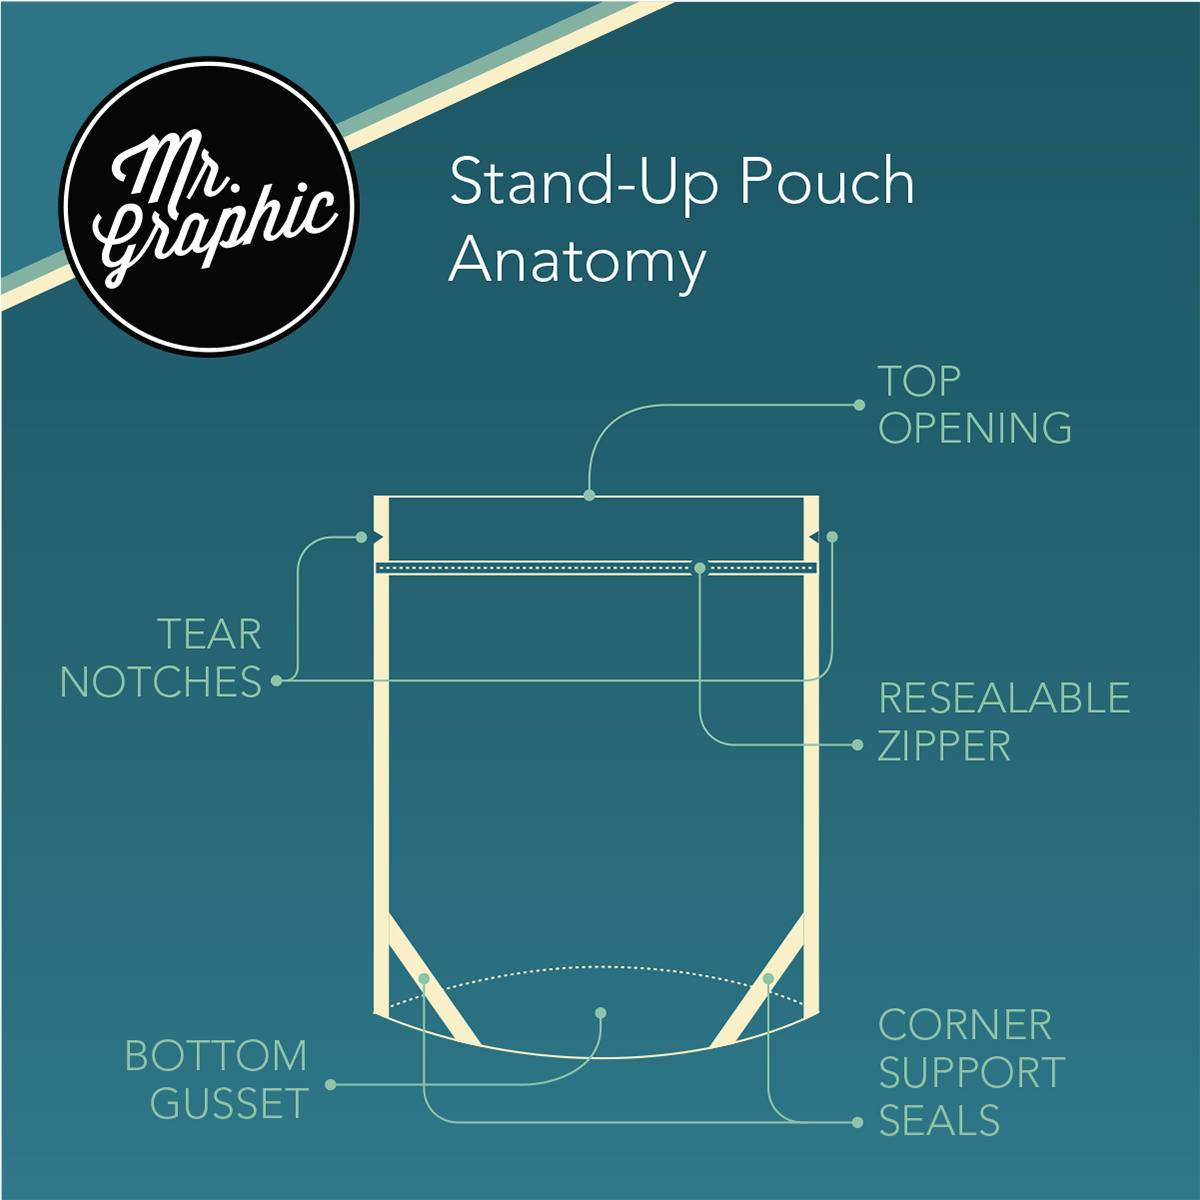 Anatomy of a Stand-up Pouch